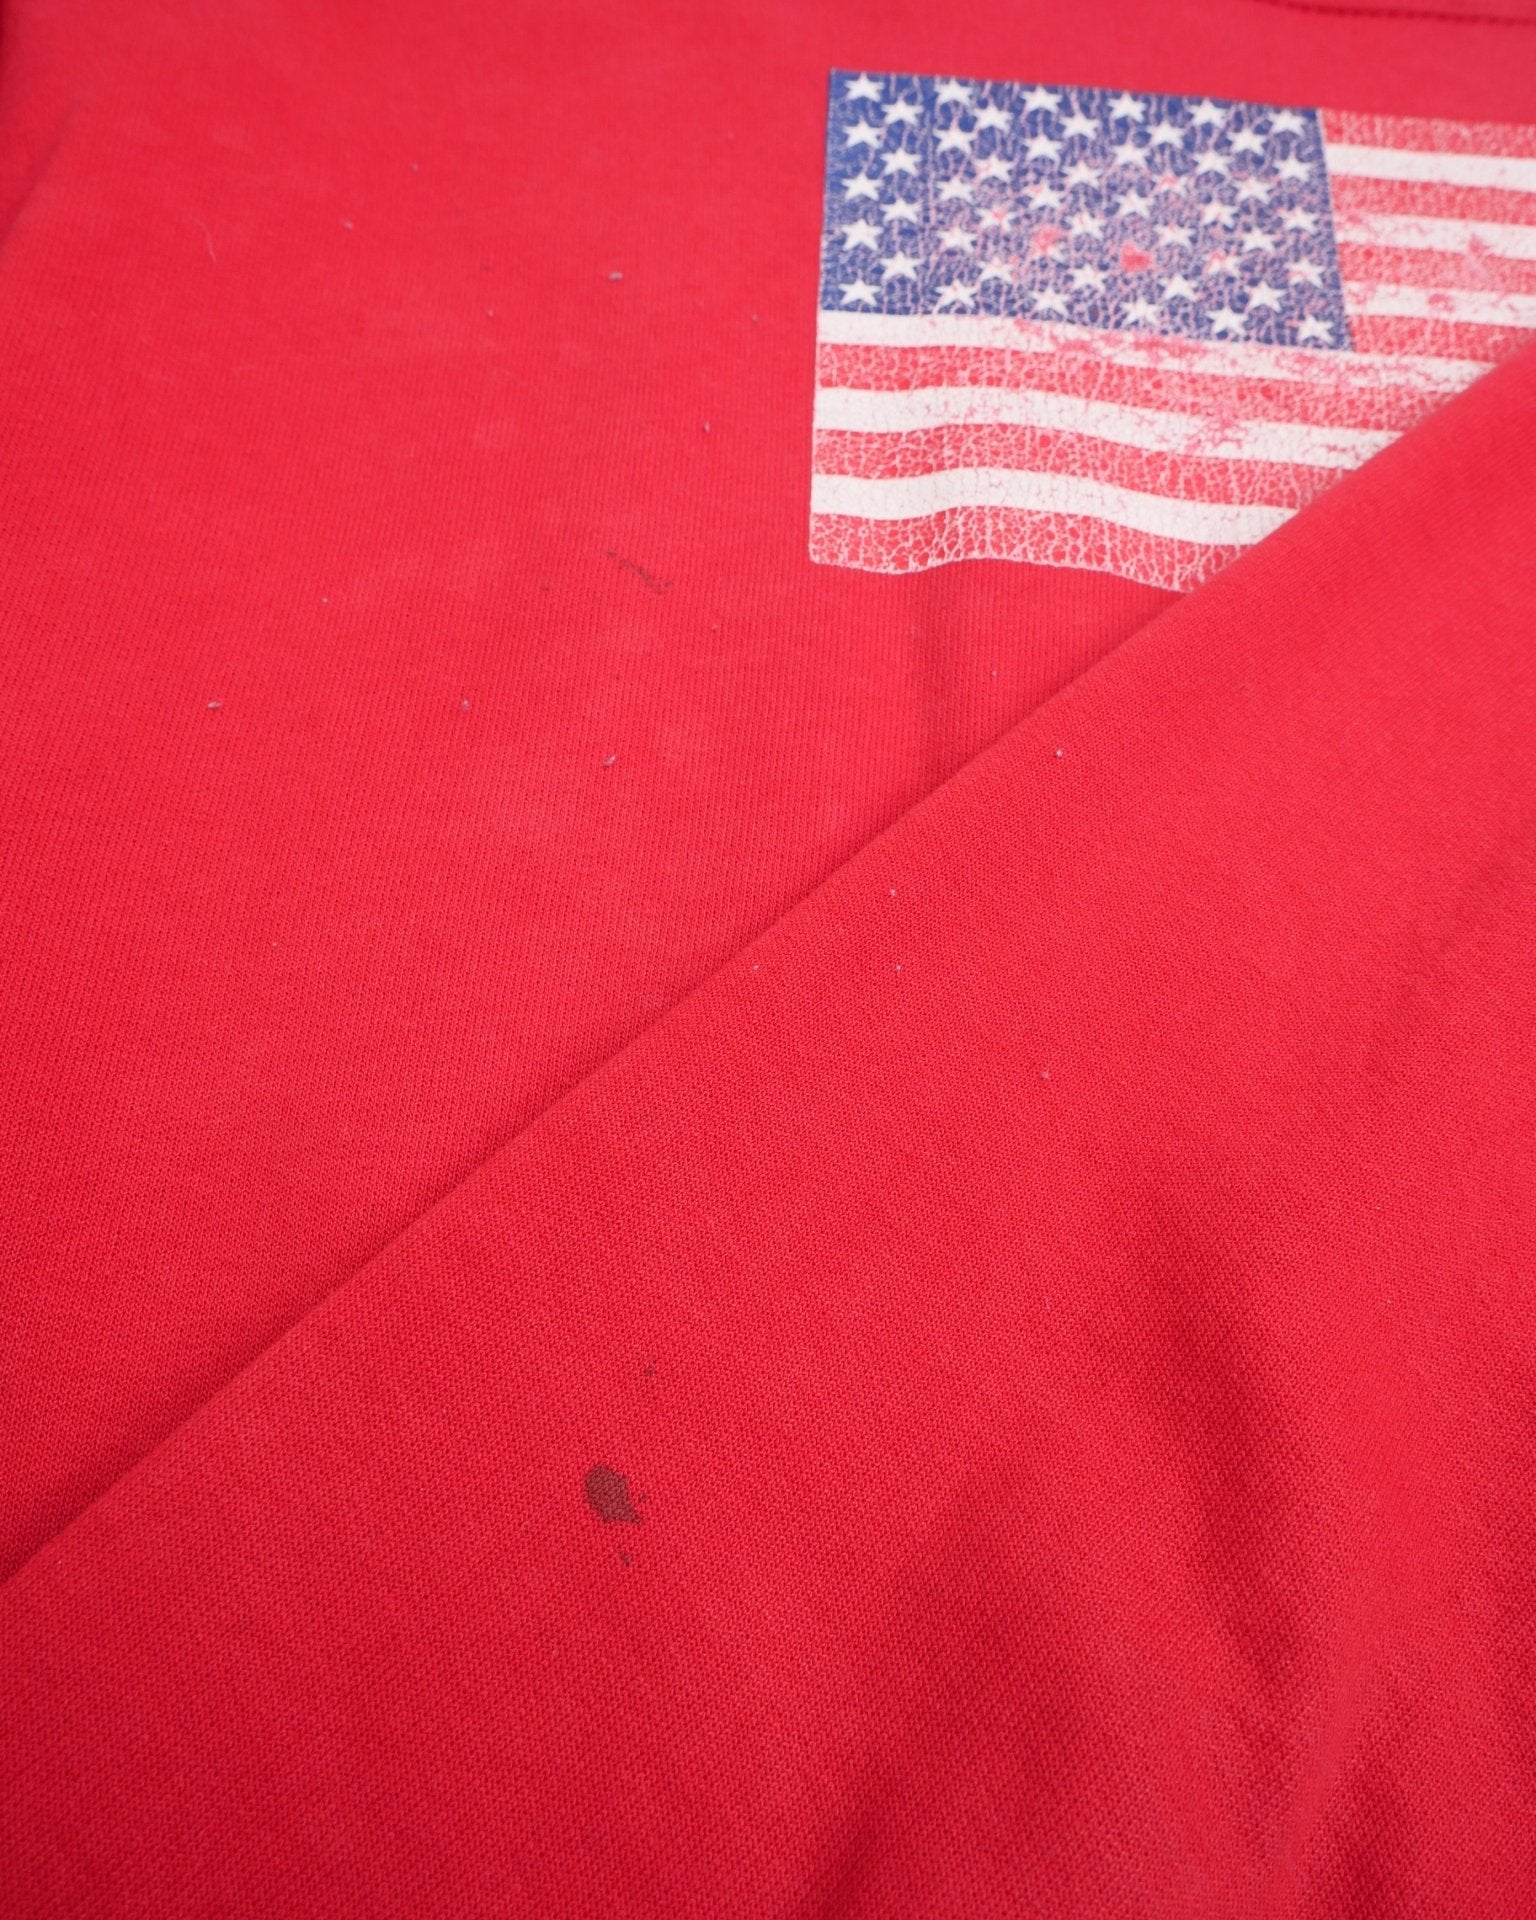 'USA Flag' printed Graphic red Sweater - Peeces